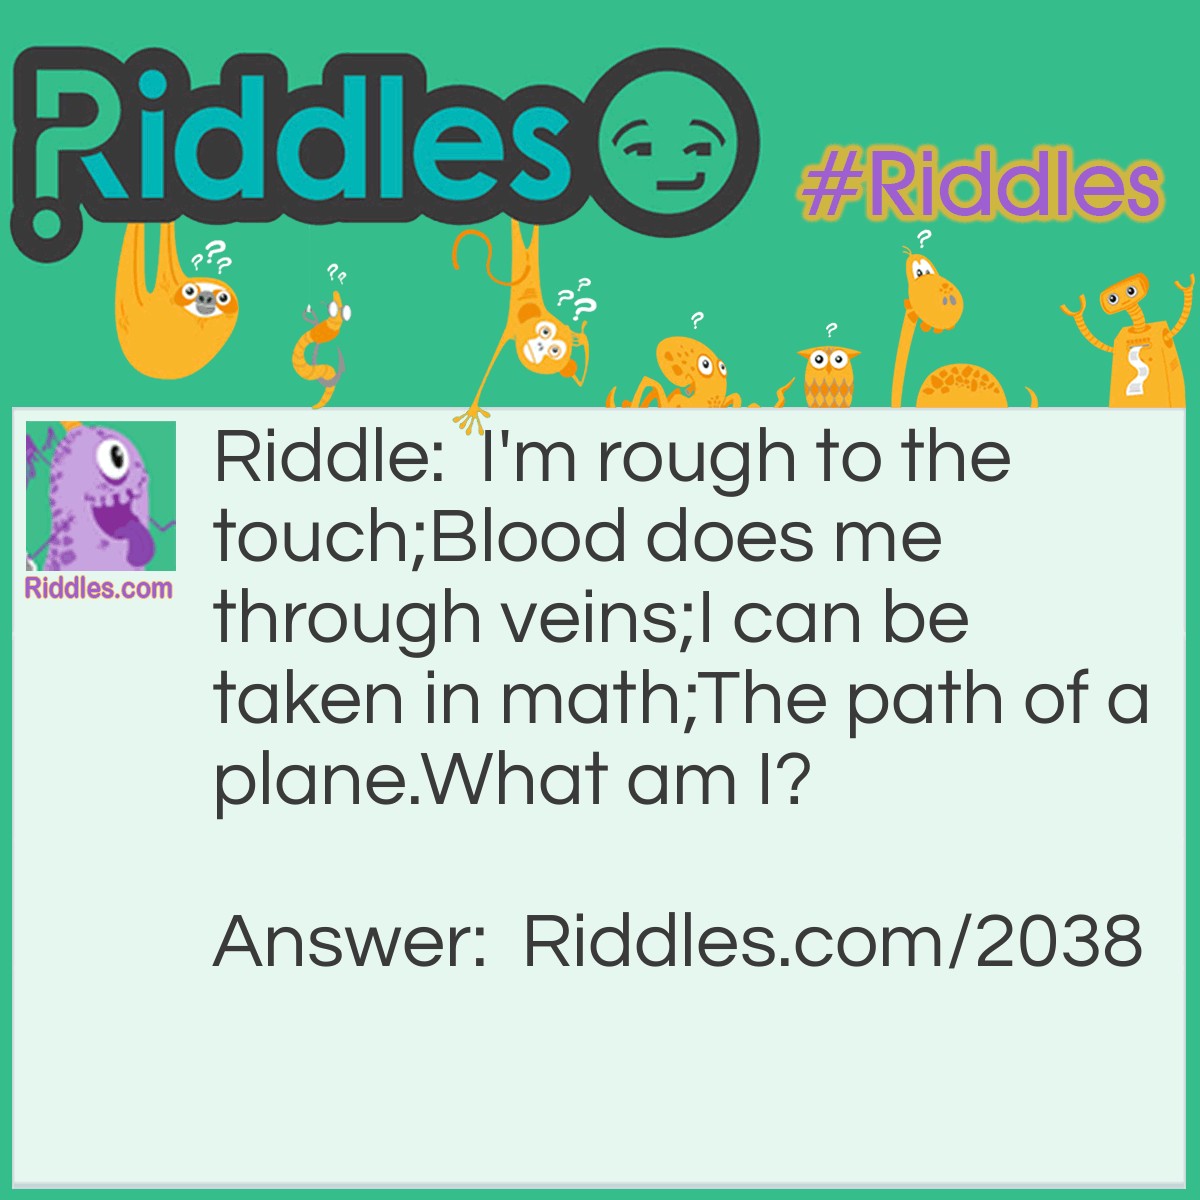 Riddle: I'm rough to the touch;
Blood does me through veins;
I can be taken in math;
The path of a plane.
What am I?  Answer: Coarse/Course